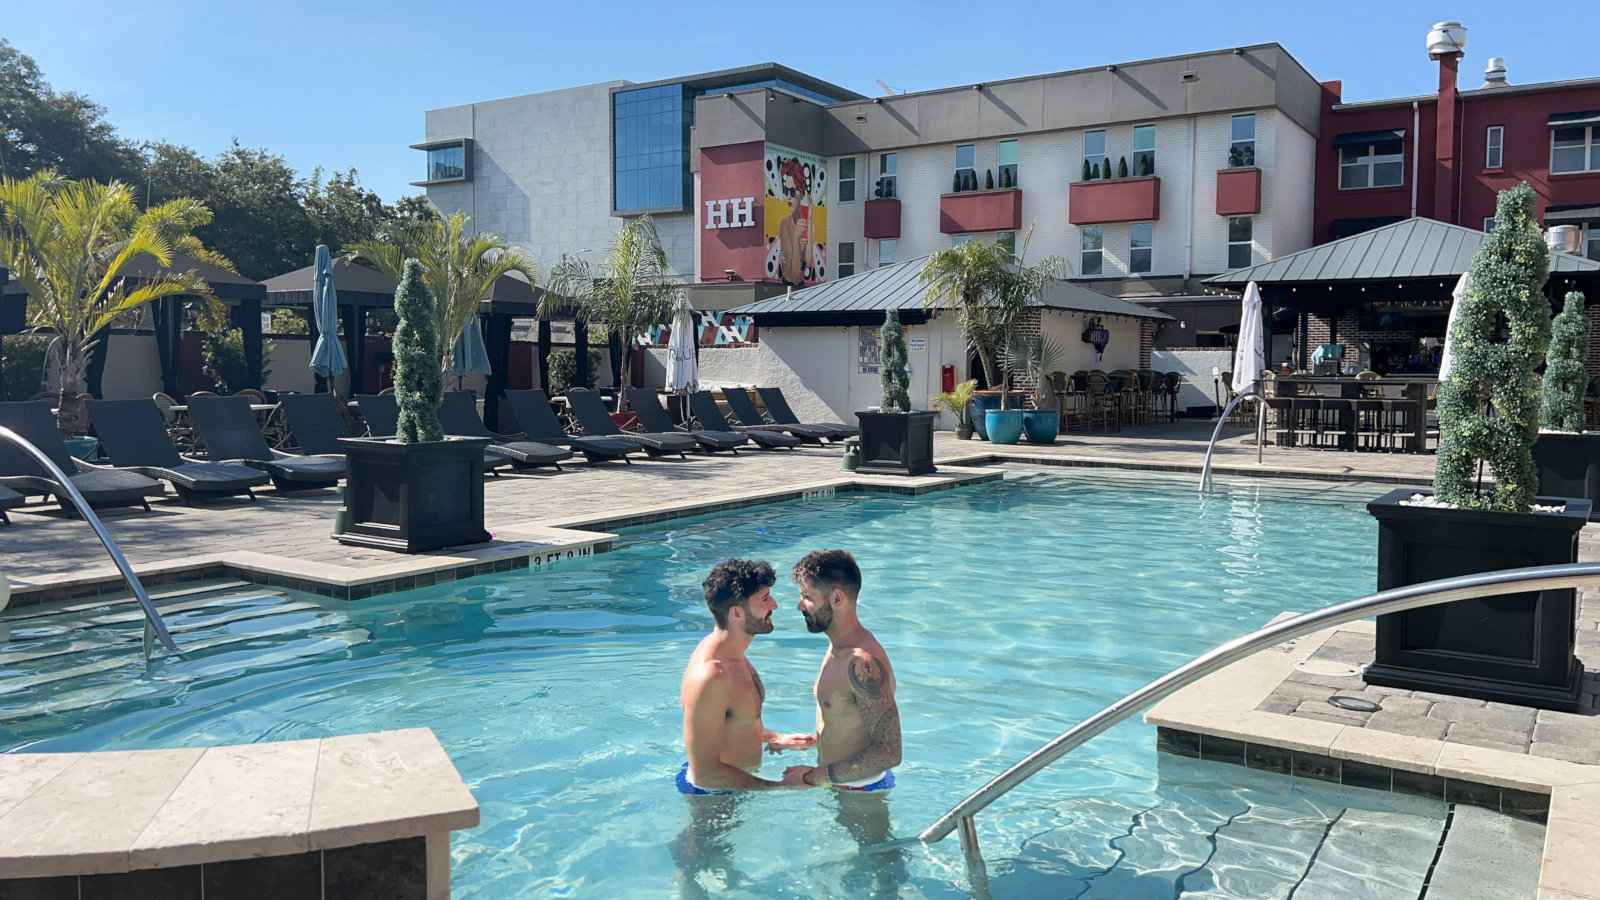 The Hollander is one of the best gay friendly hotels in St Petersburg Florida